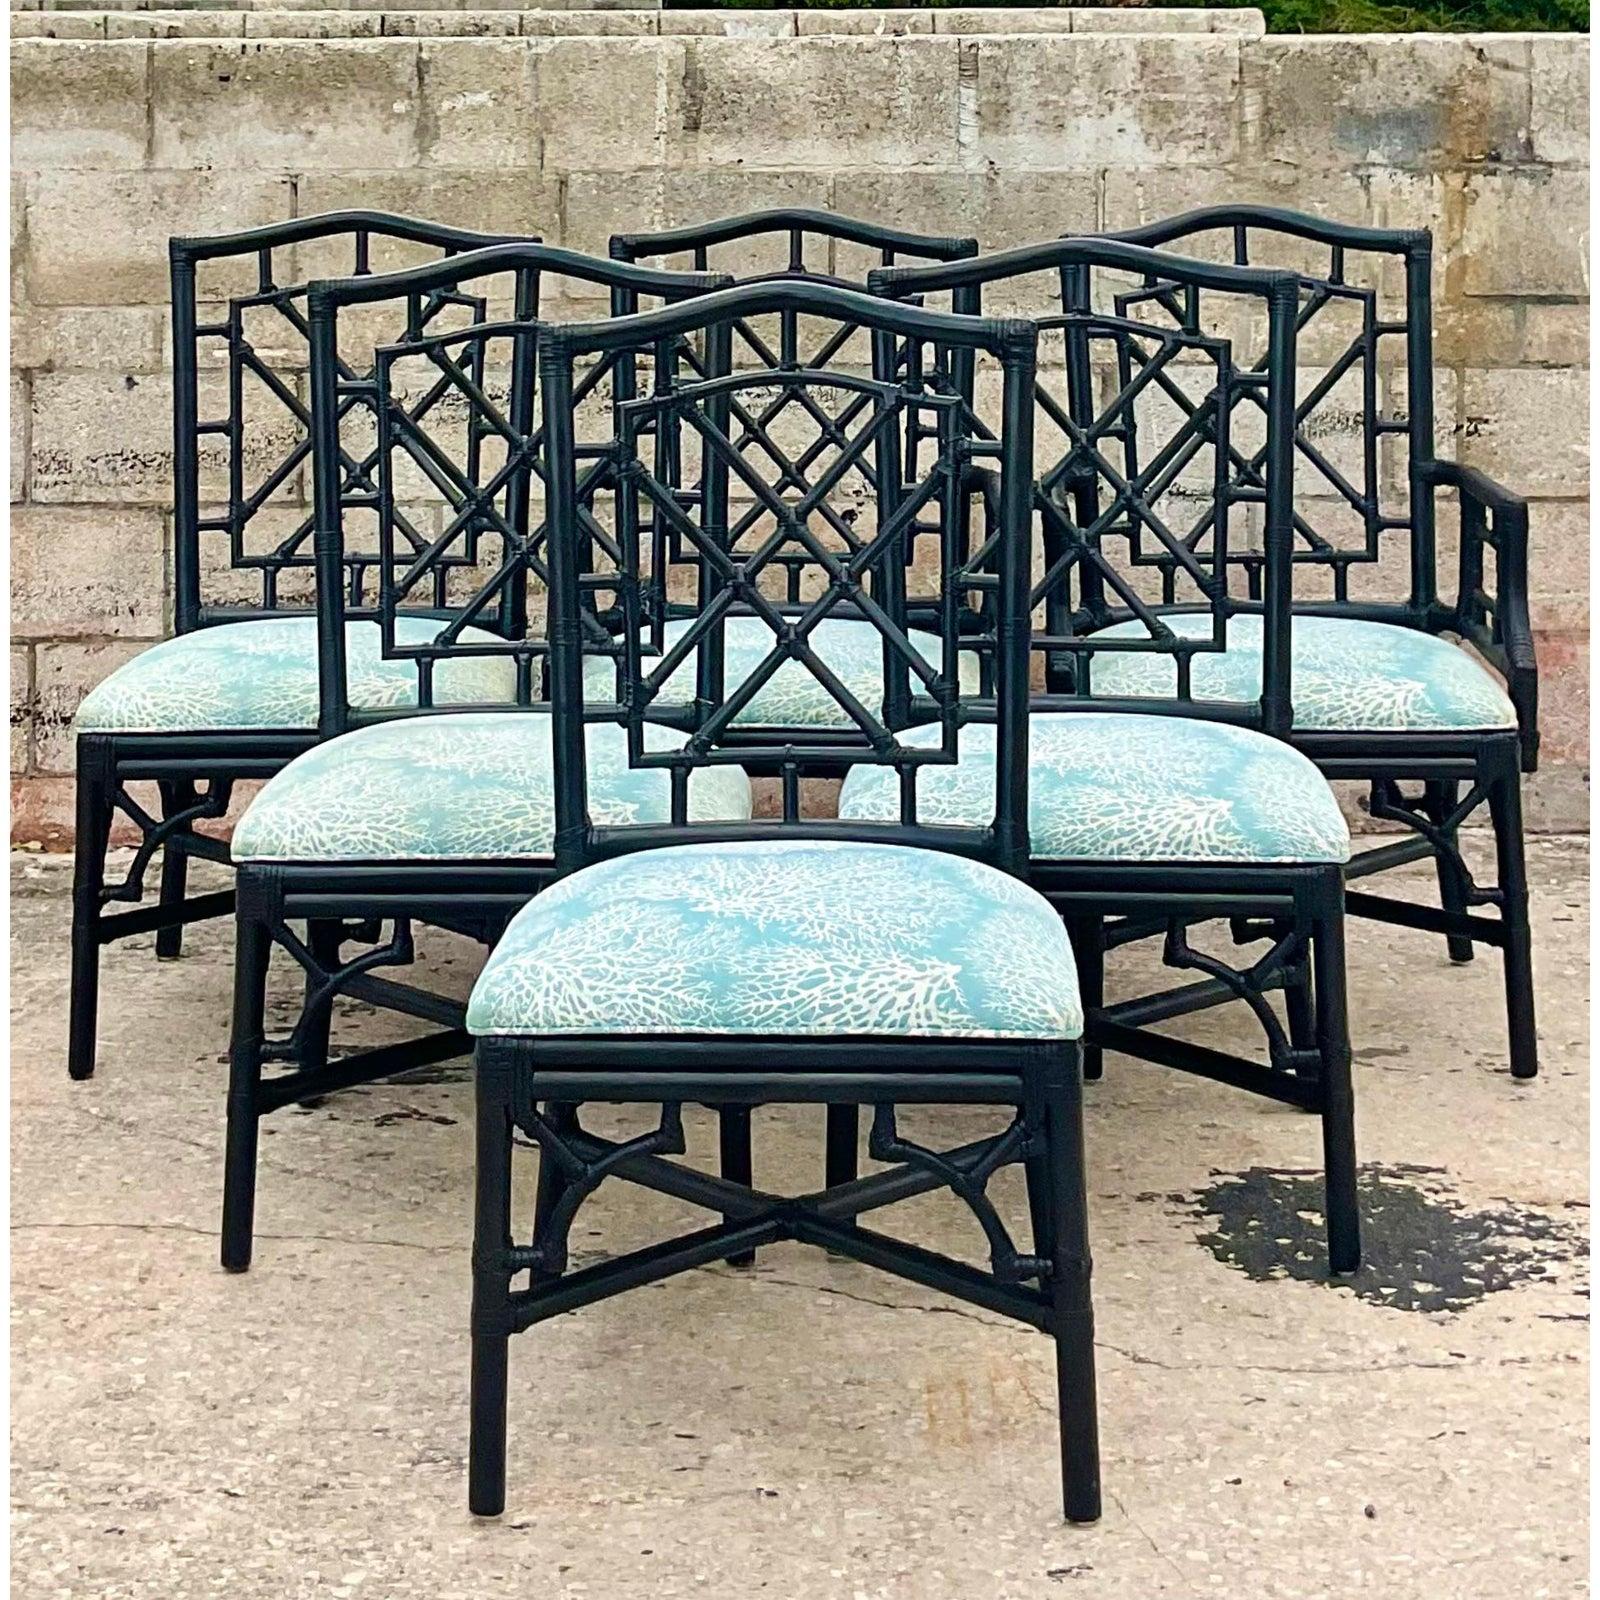 Fantastic set of 6 coastal rattan dining chairs. Iconic Chinese Chippendale fretwork design with a beautiful pale blue coral print upholstery. Matte black paint with all wraps intact. A gorgeous set with two arm chairs and six sides.